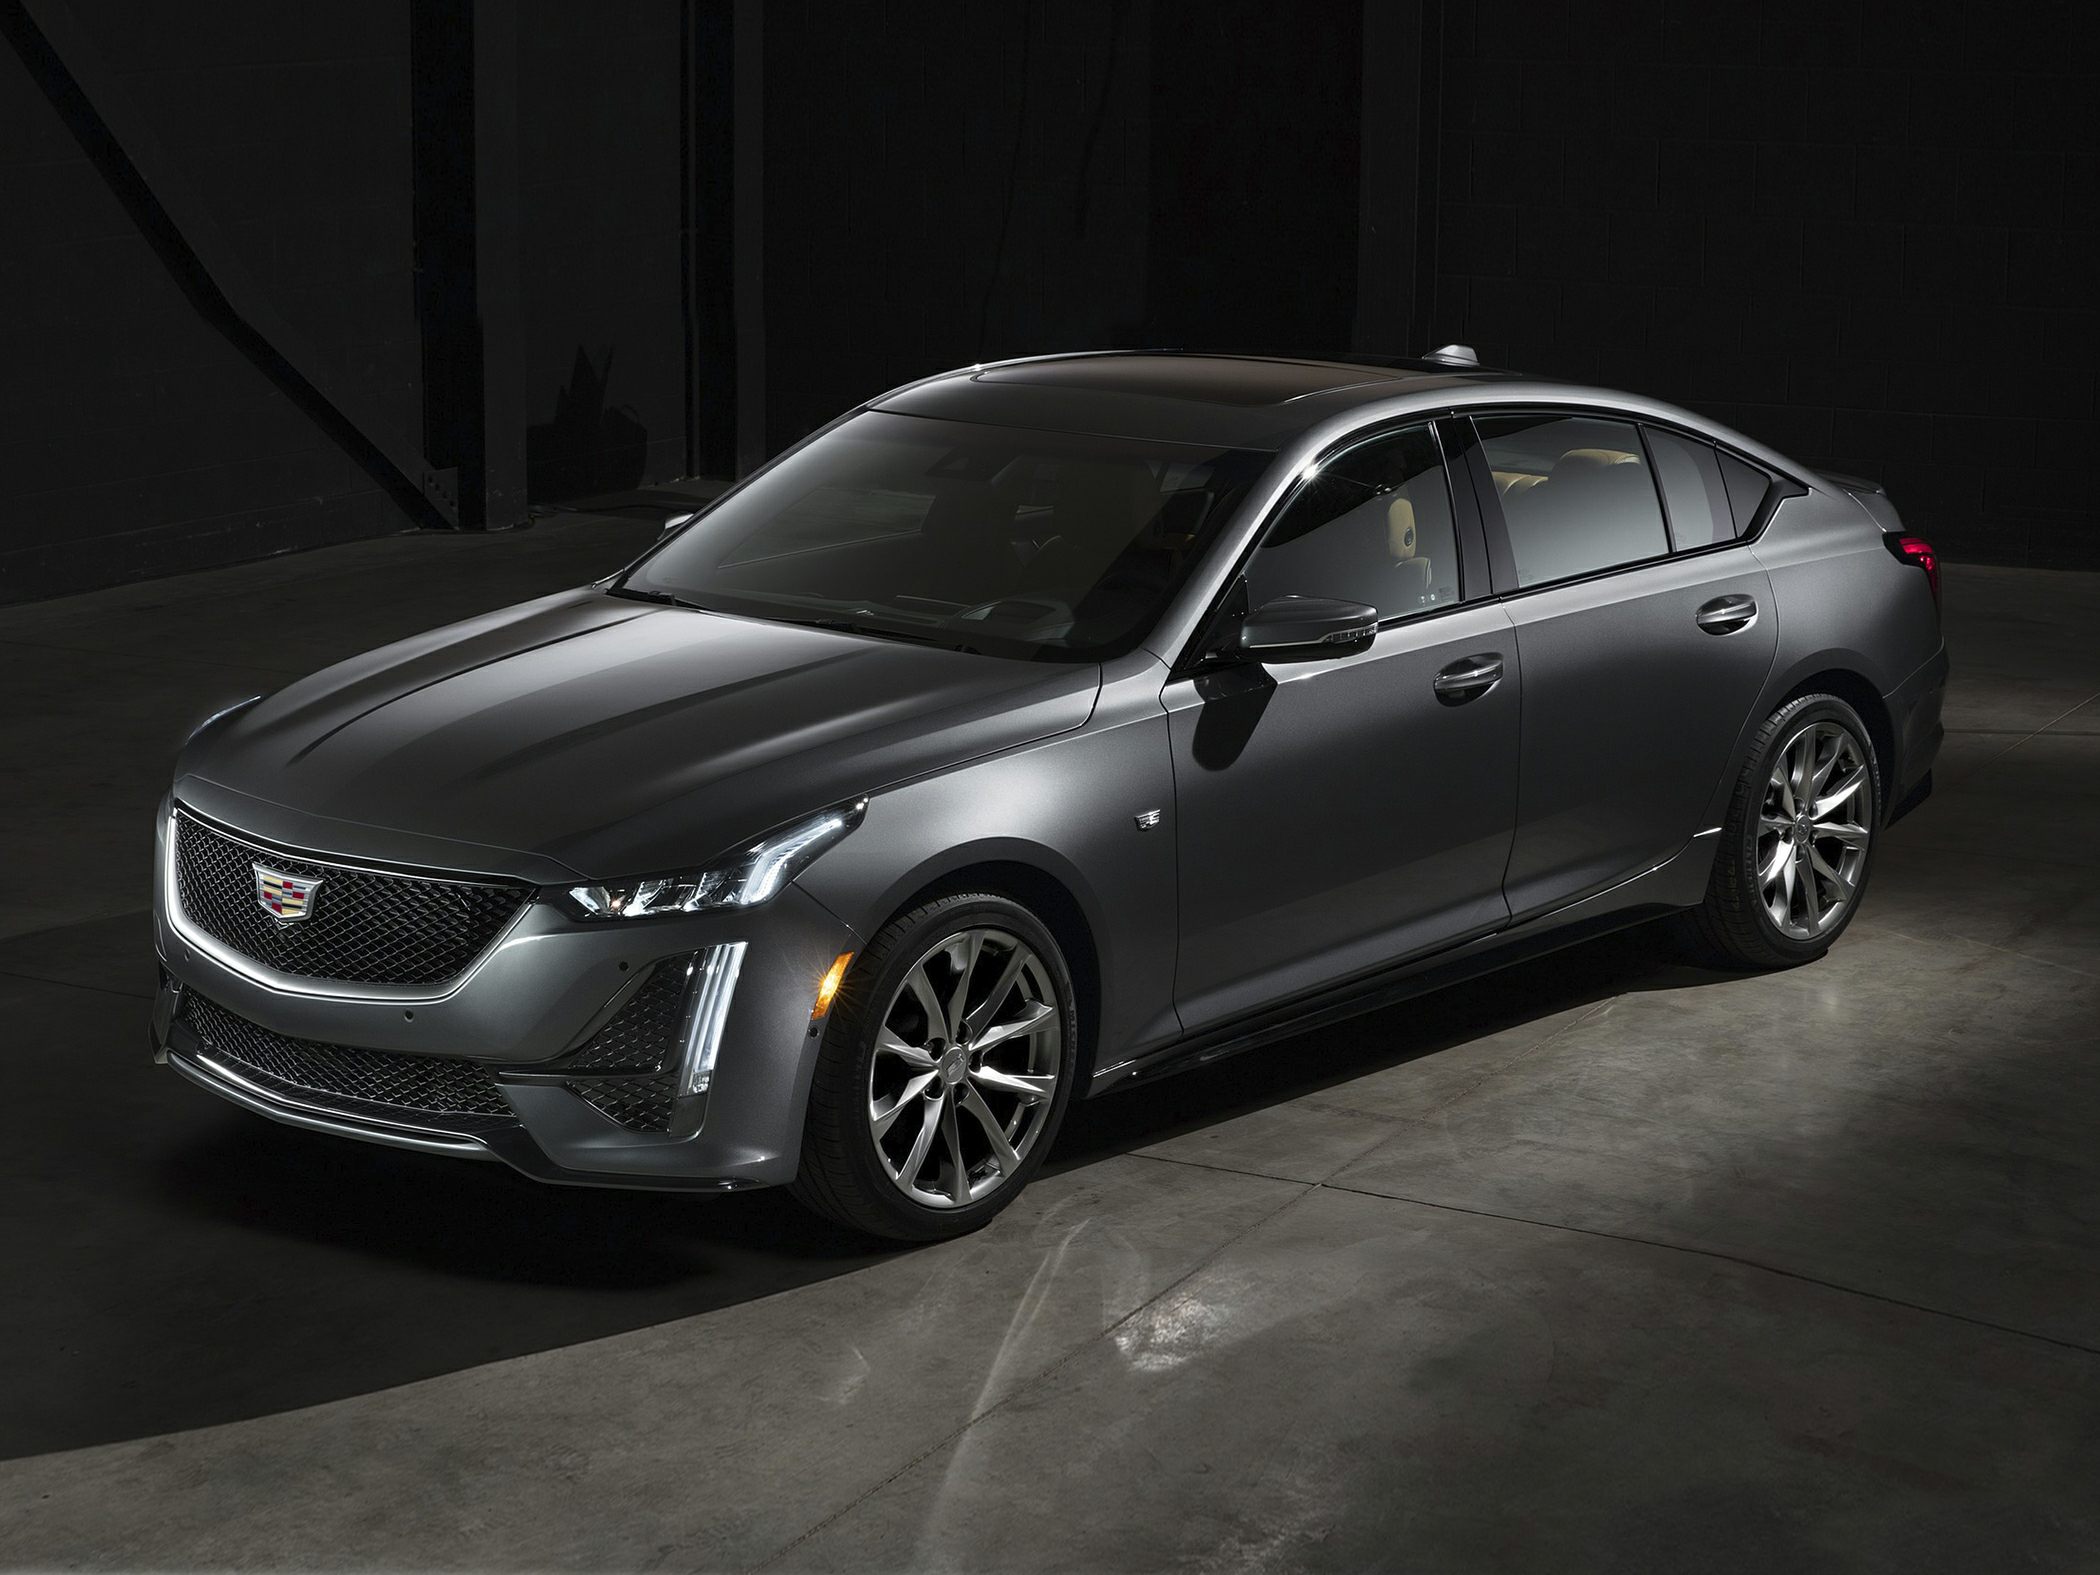 2025 Cadillac CT5 Price, Pictures, Release Date & More